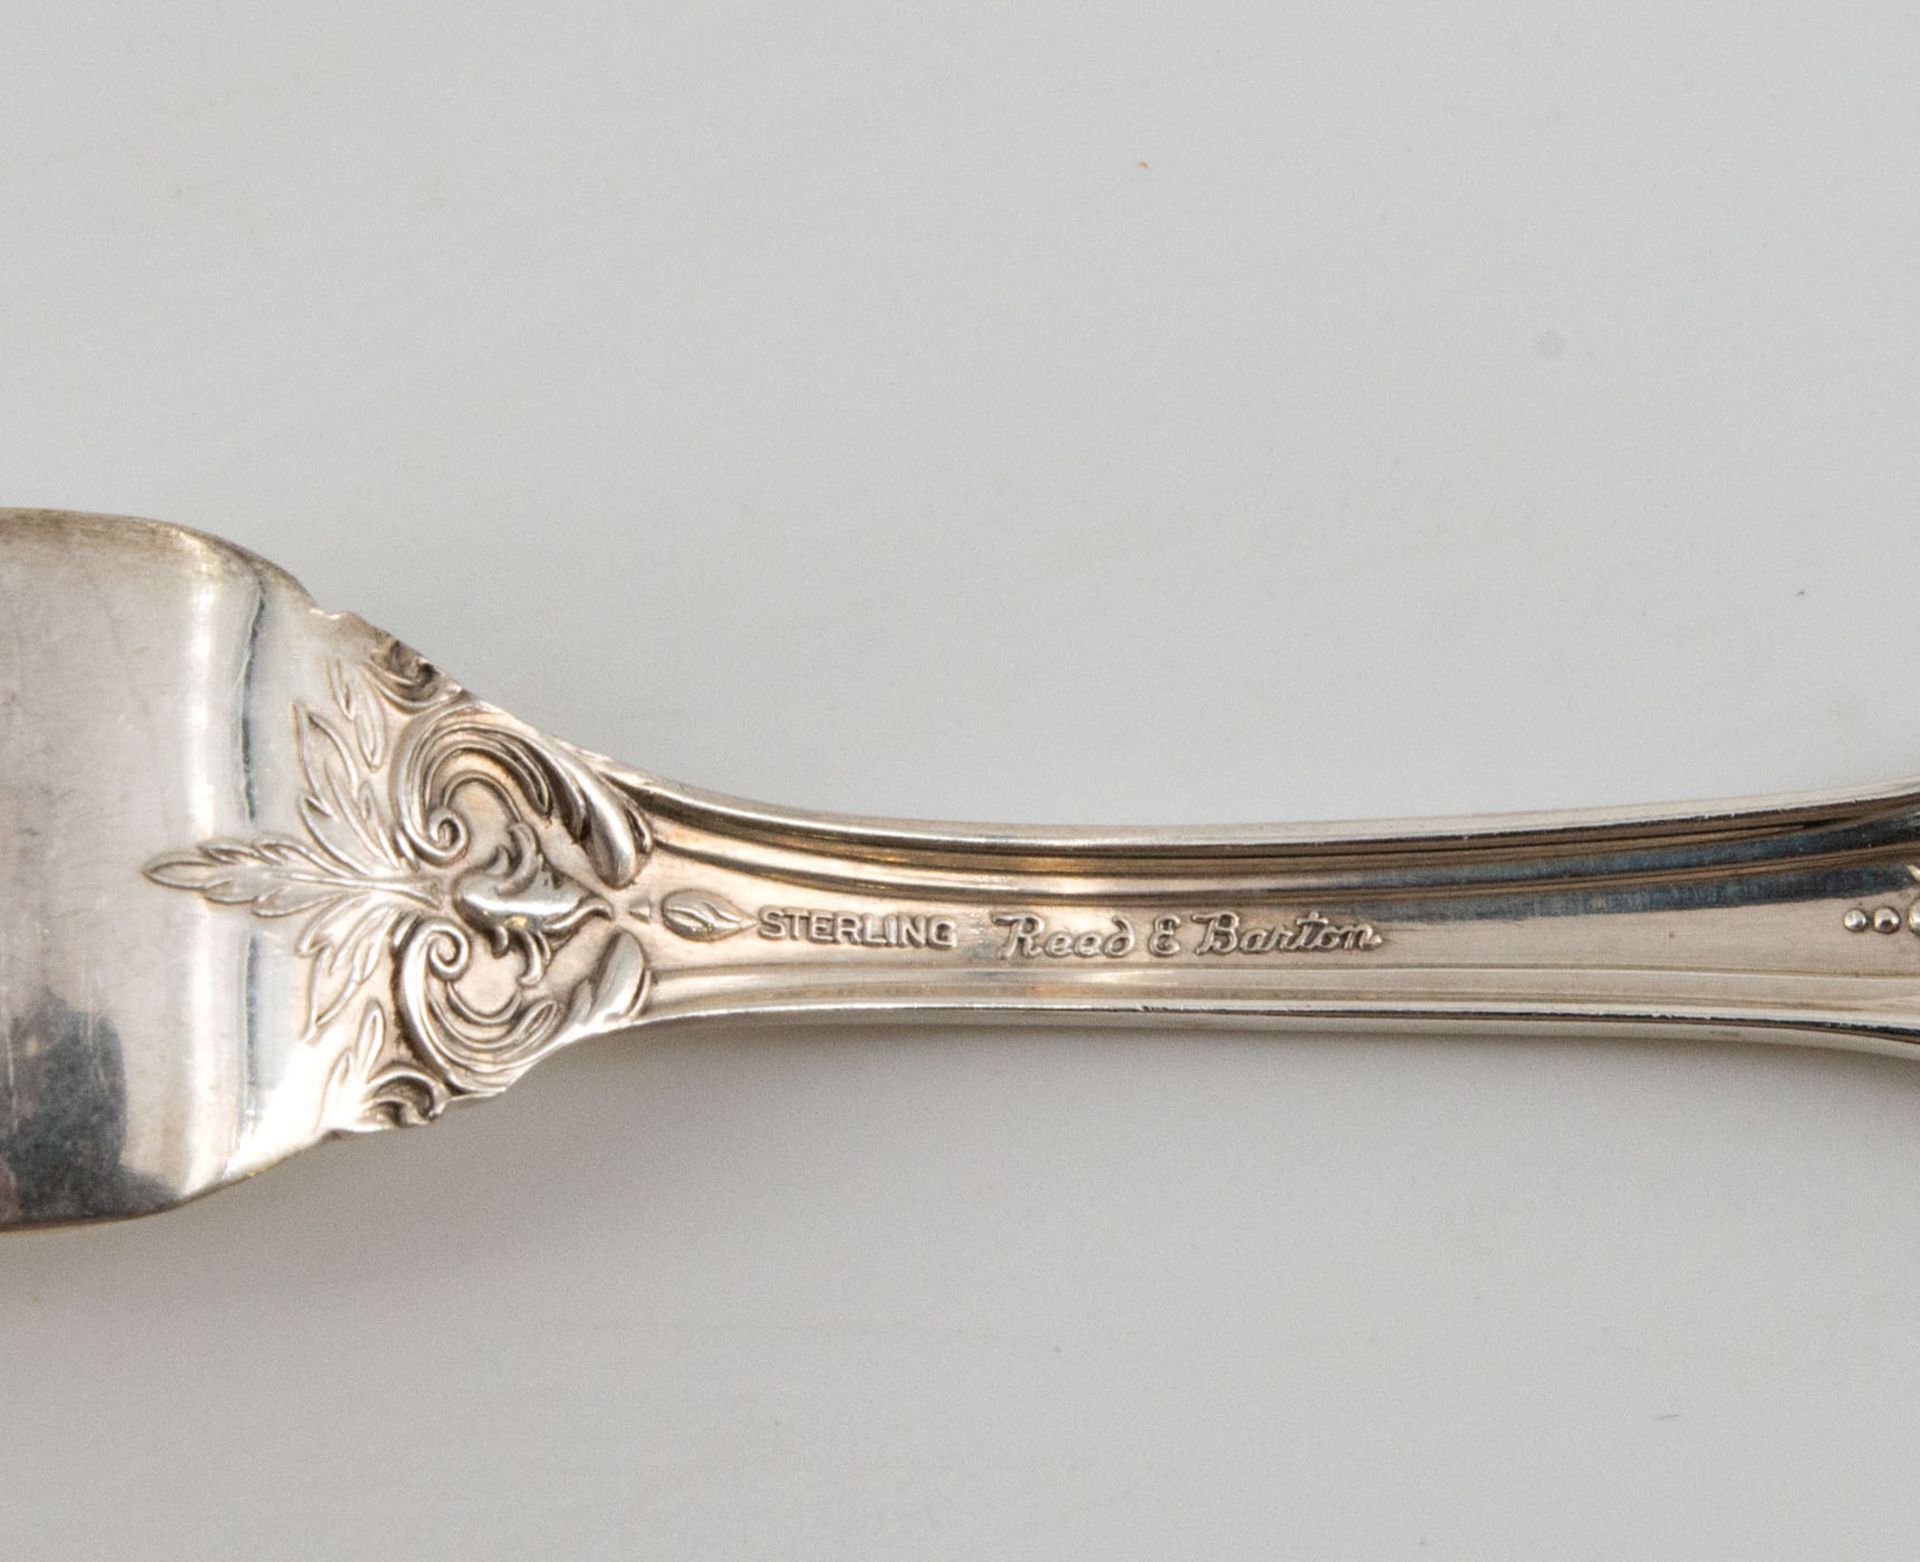 A Fine Sterling Silver Flatware for 12 by Reed&Barton, USA - Image 2 of 2